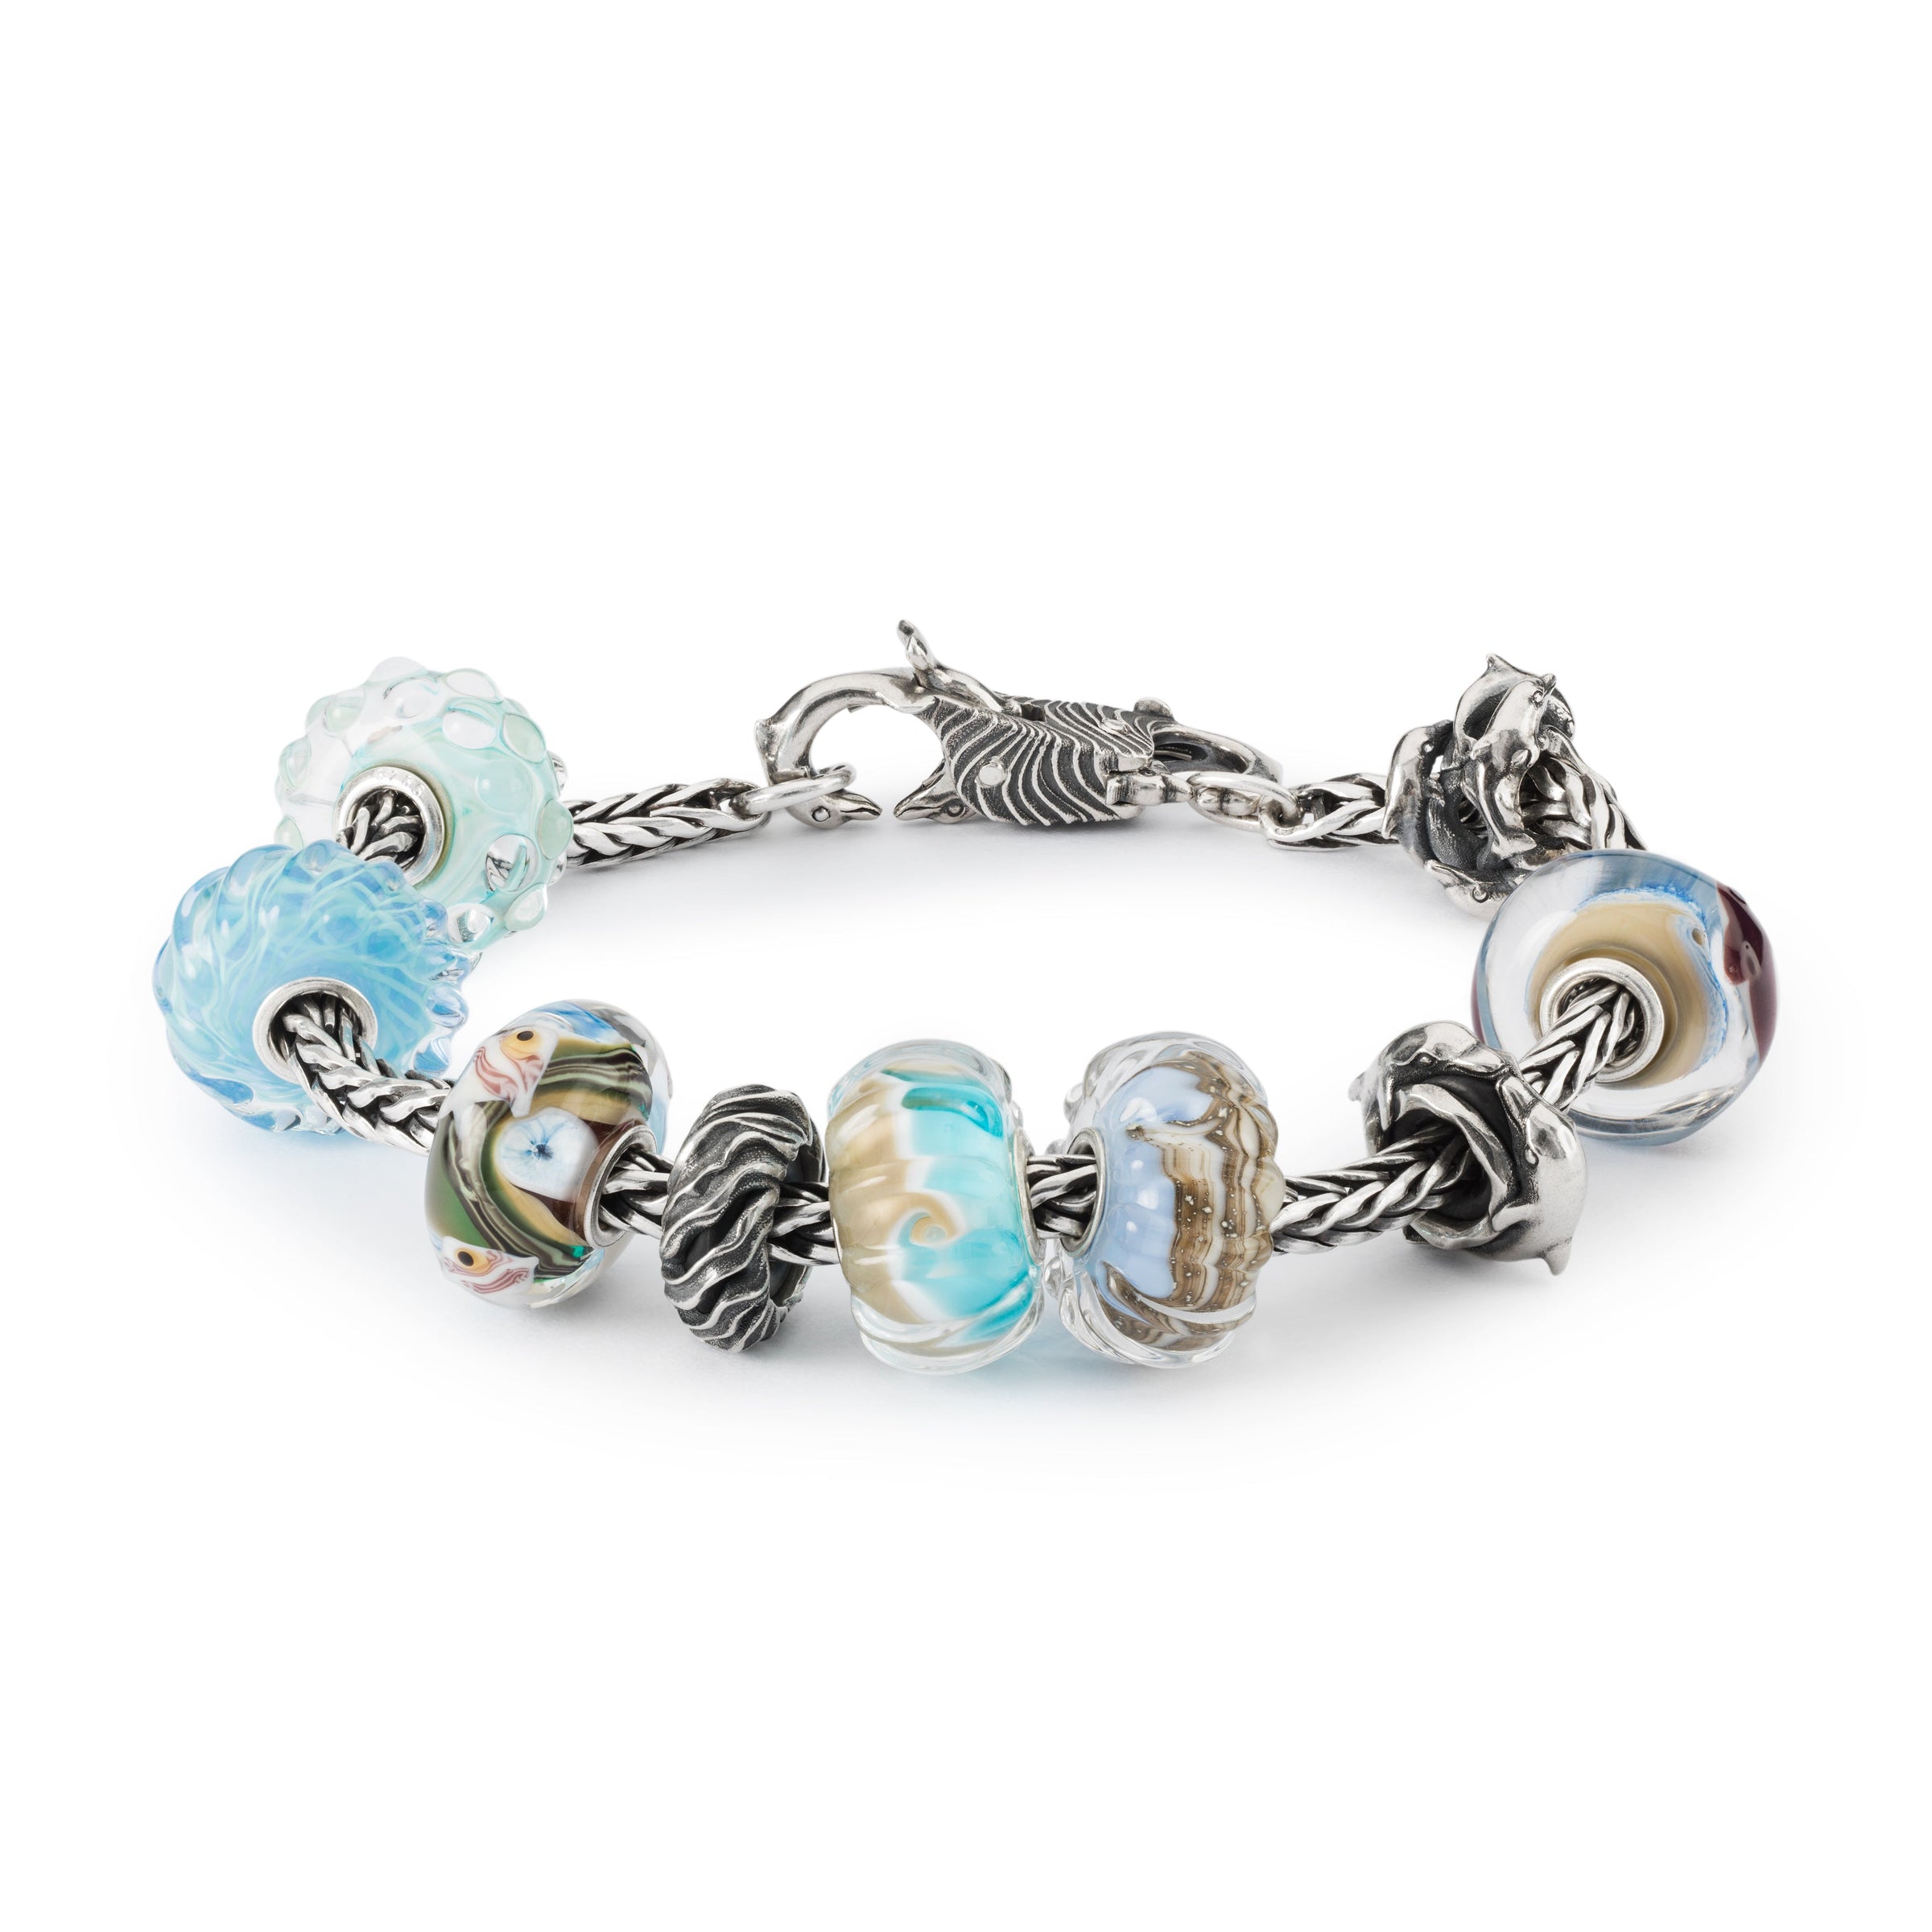 Dolphins Delight beads and clasp on a foxtail silver bracelet